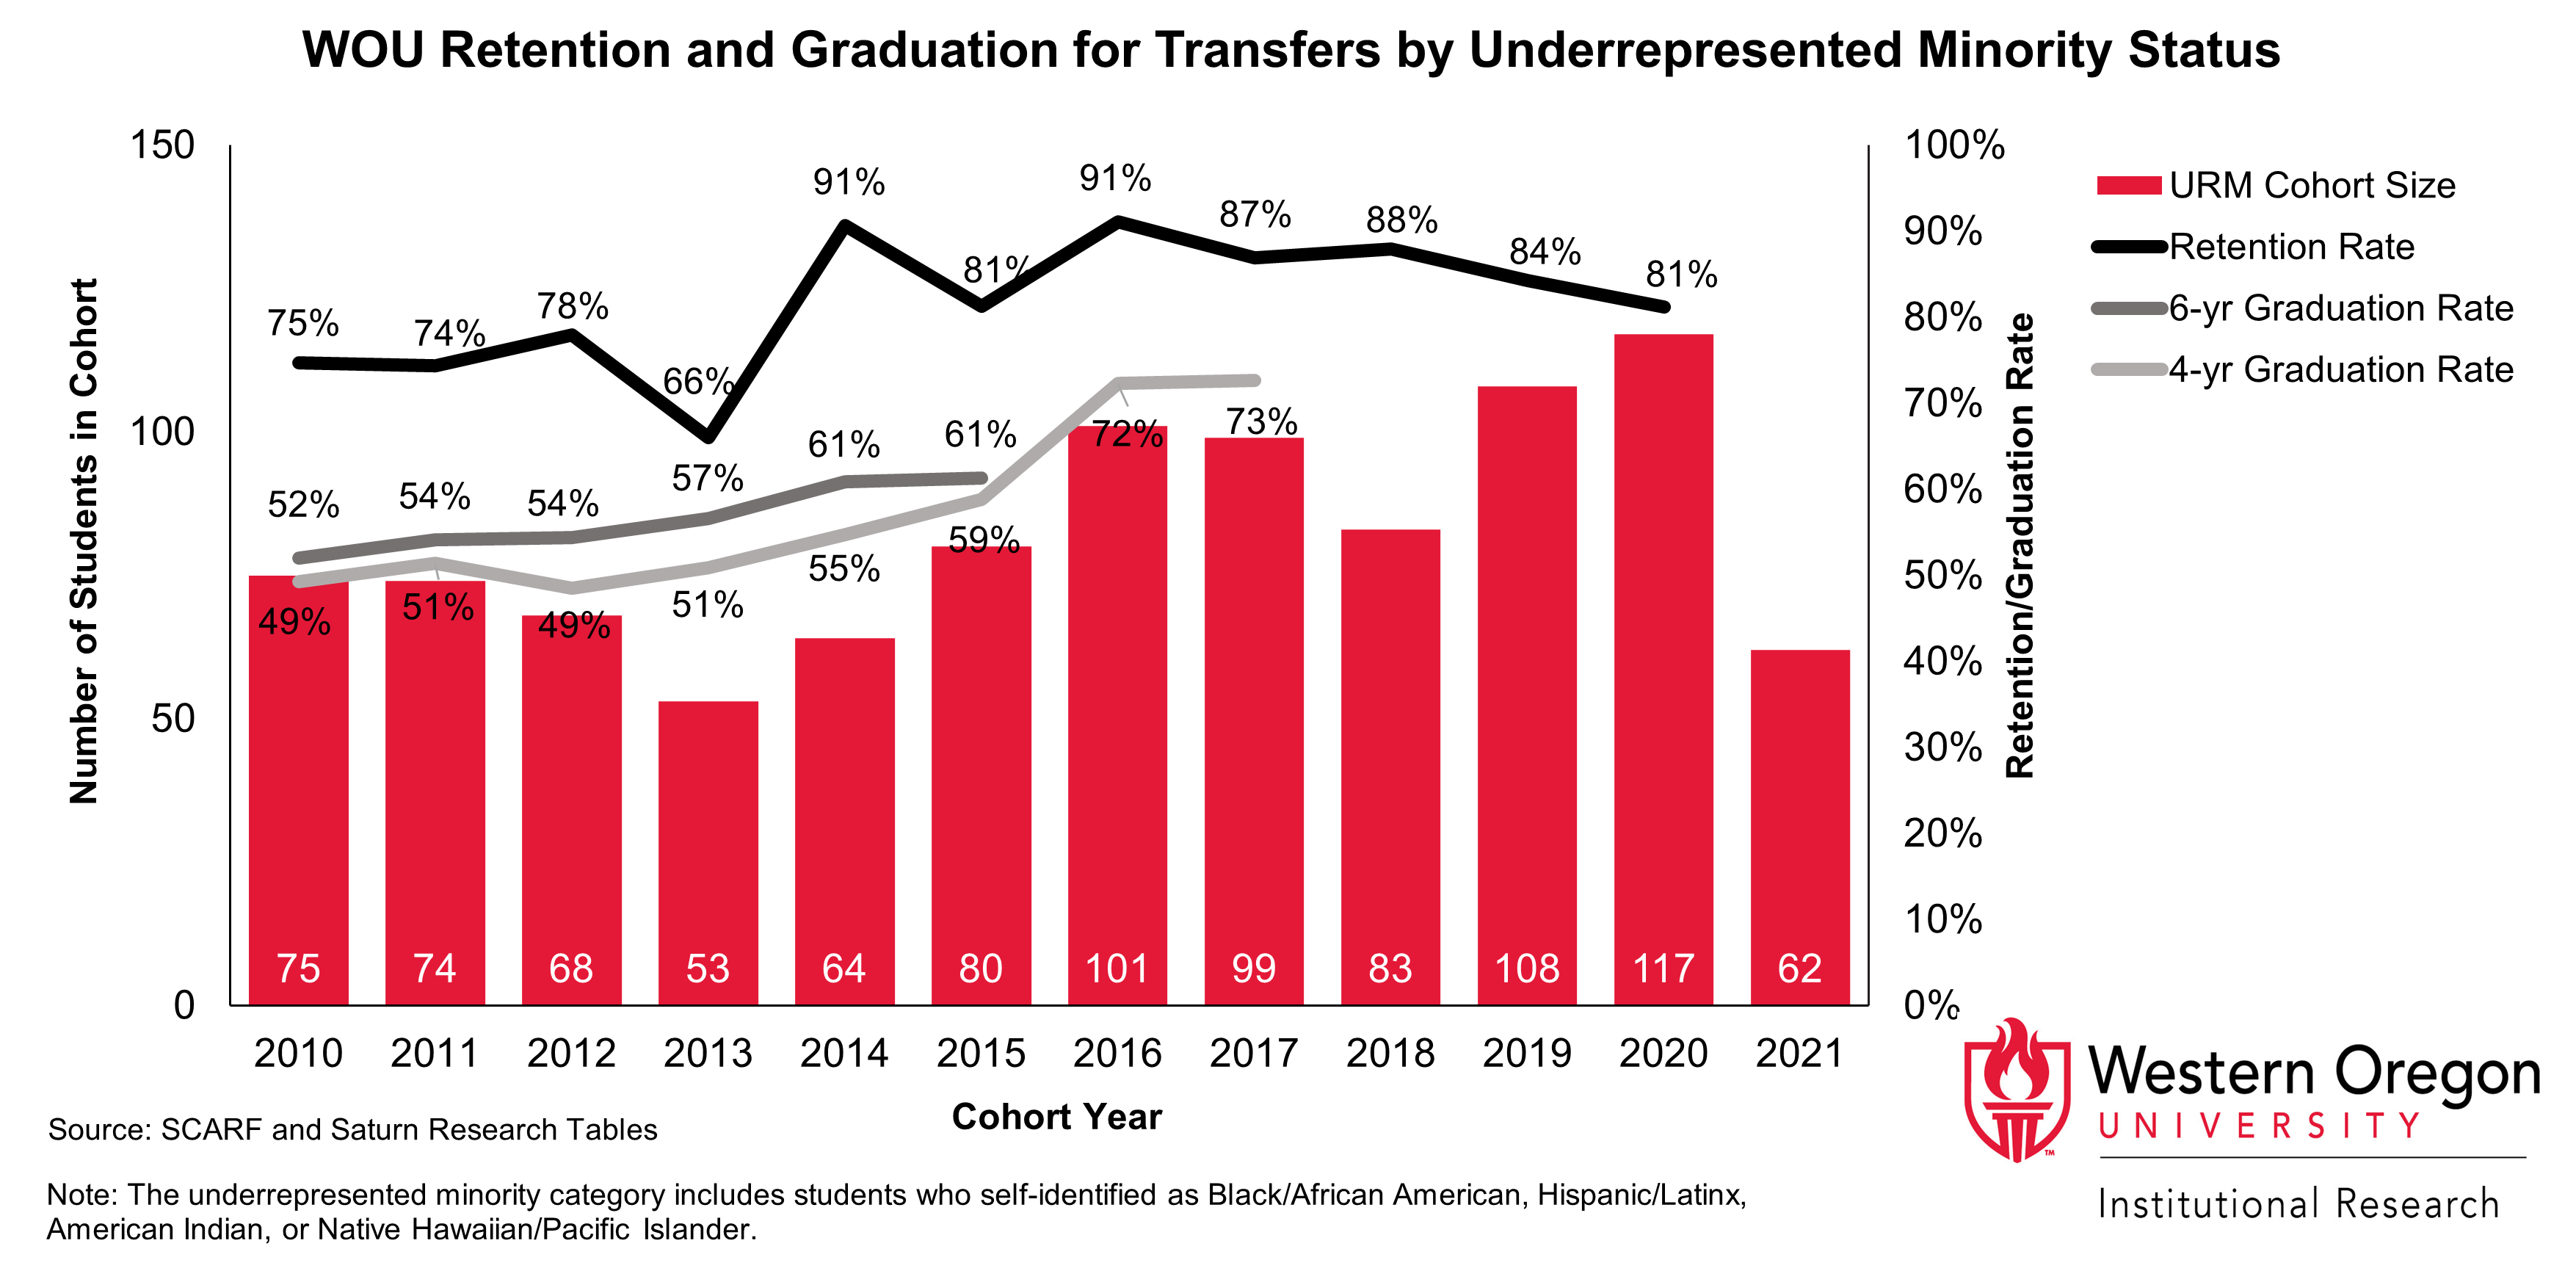 Bar and line graph of retention and 4- and 6-year graduation rates since 2010 for WOU transfer students from underrepresented minority groups, showing that graduation rates have been steadily increasing while retention rates have remained largely stable